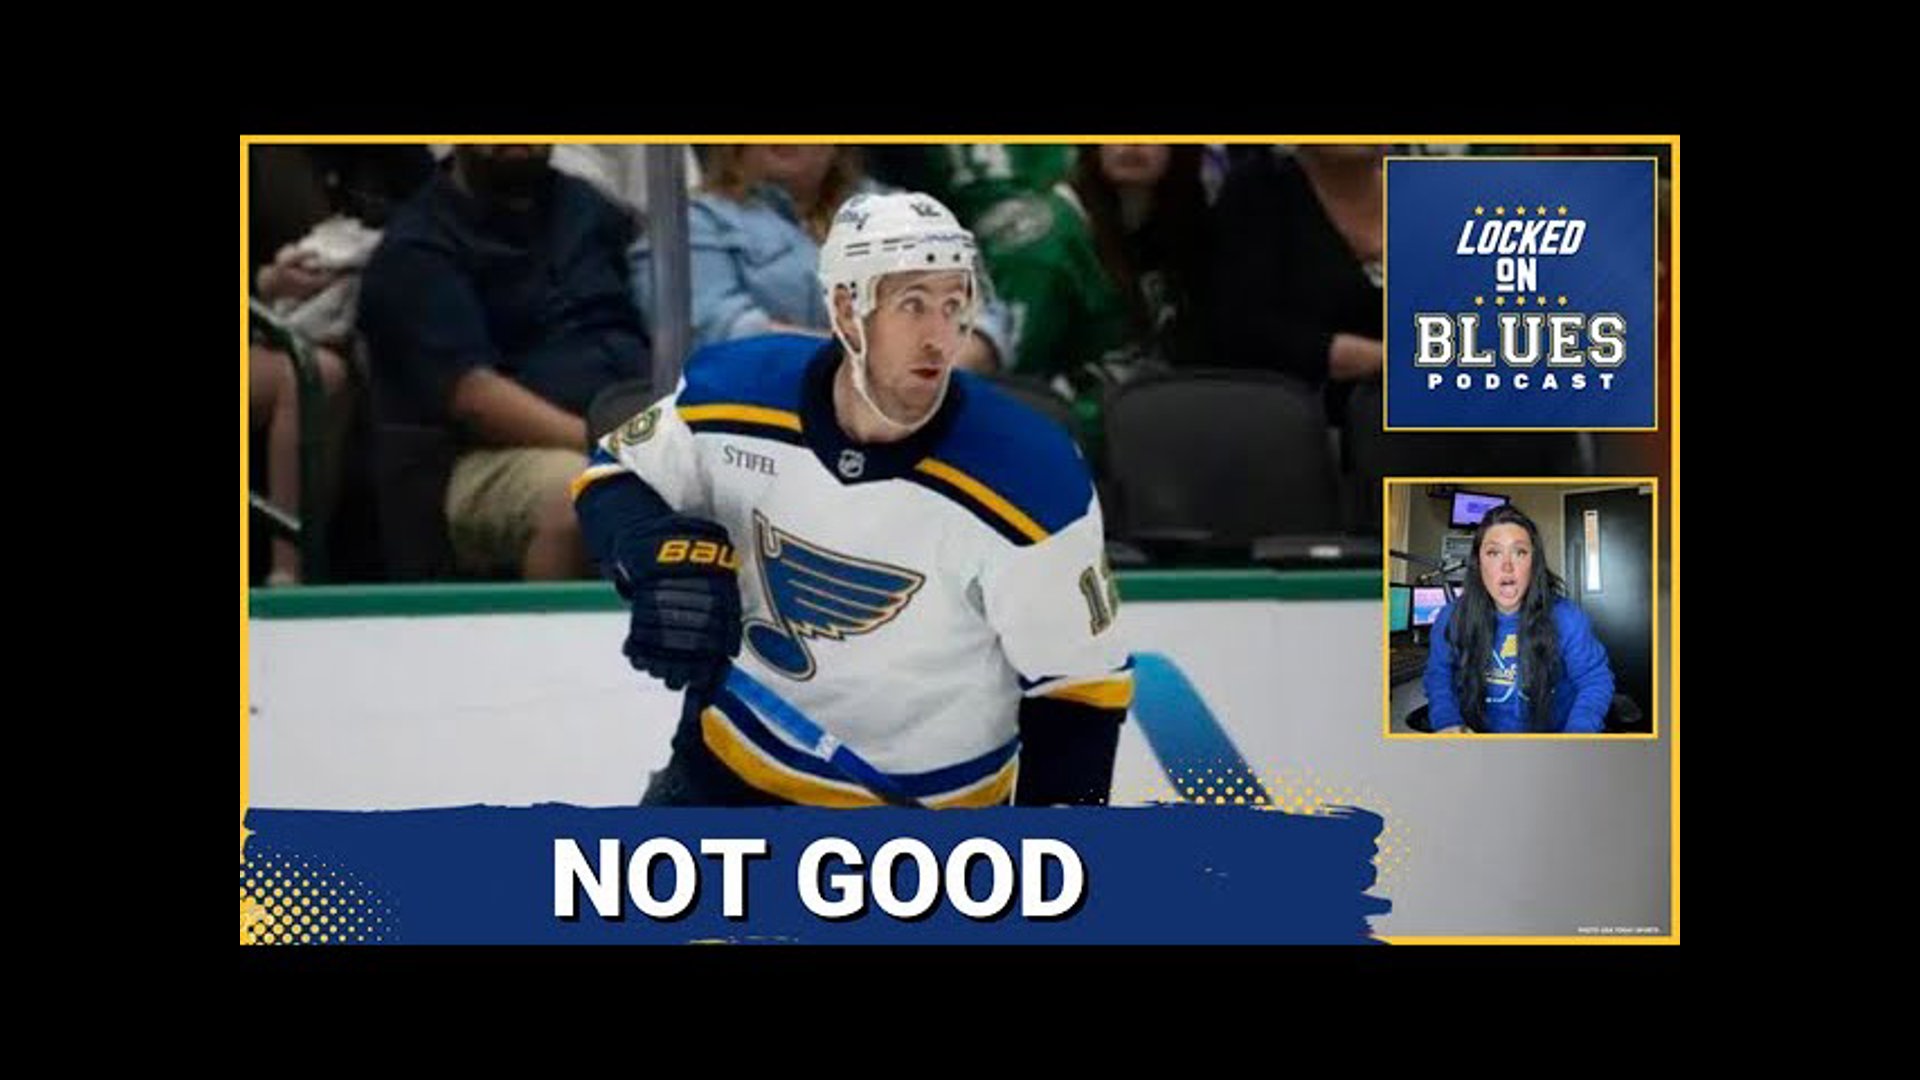 DO THE ST. LOUIS BLUES TRADE SOME OF THEIR OLDER PLAYERS??